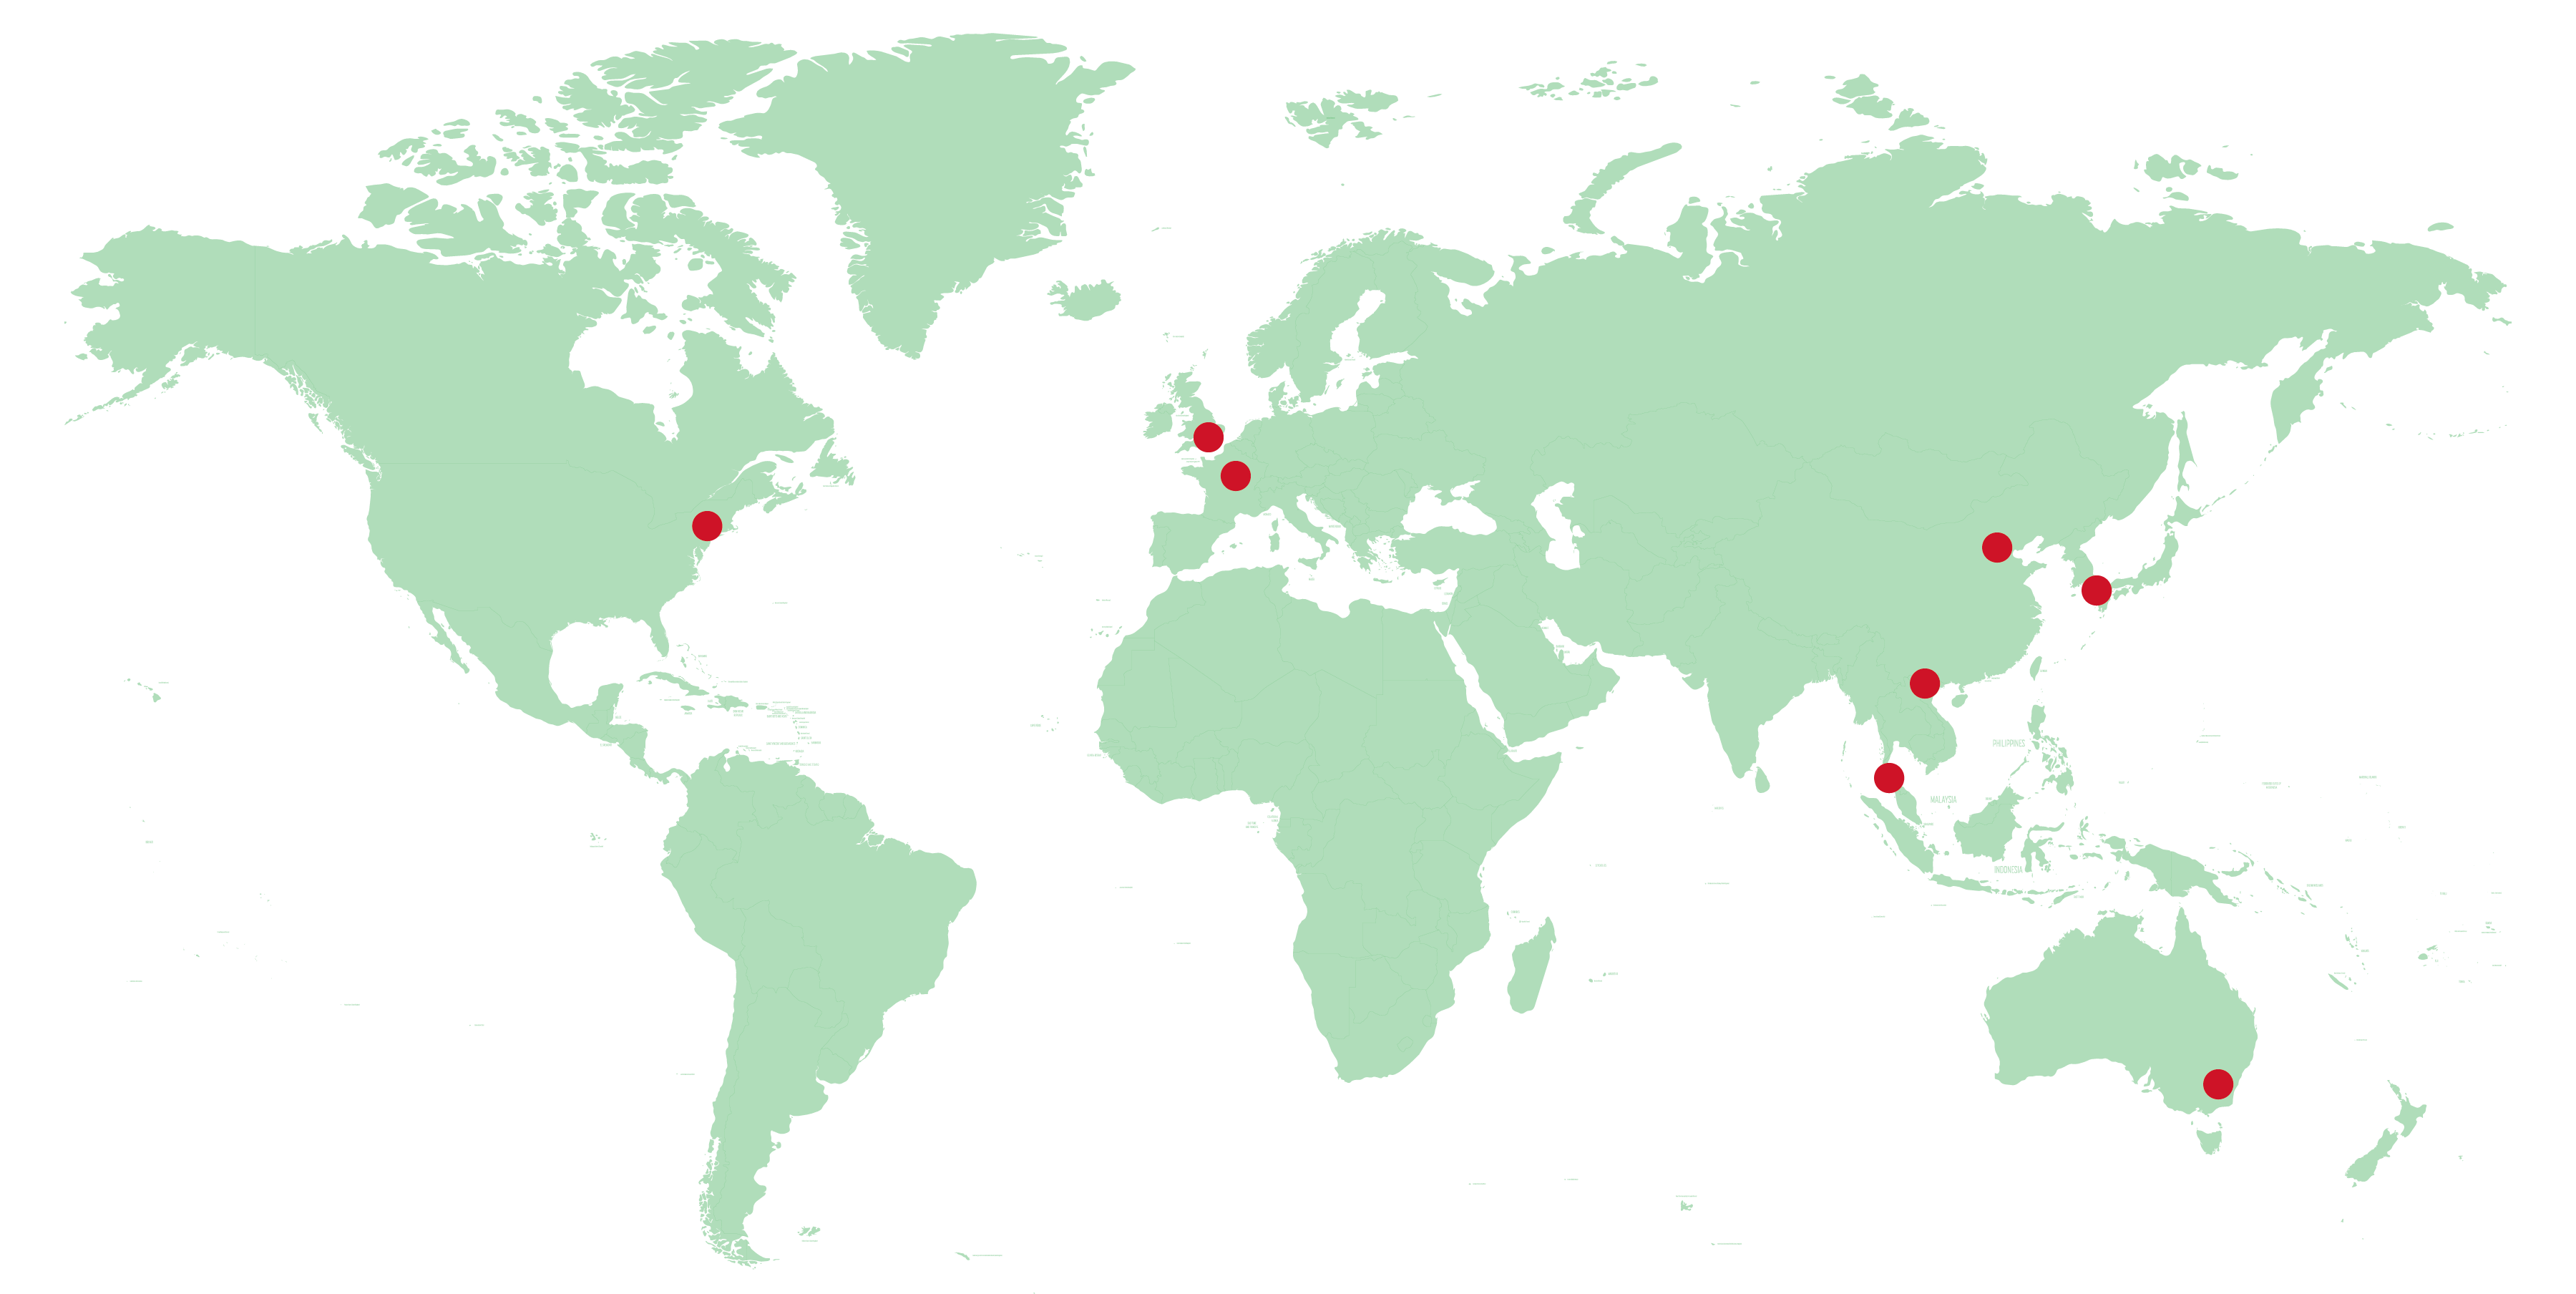 The location of 3-D Matrix offices across the world